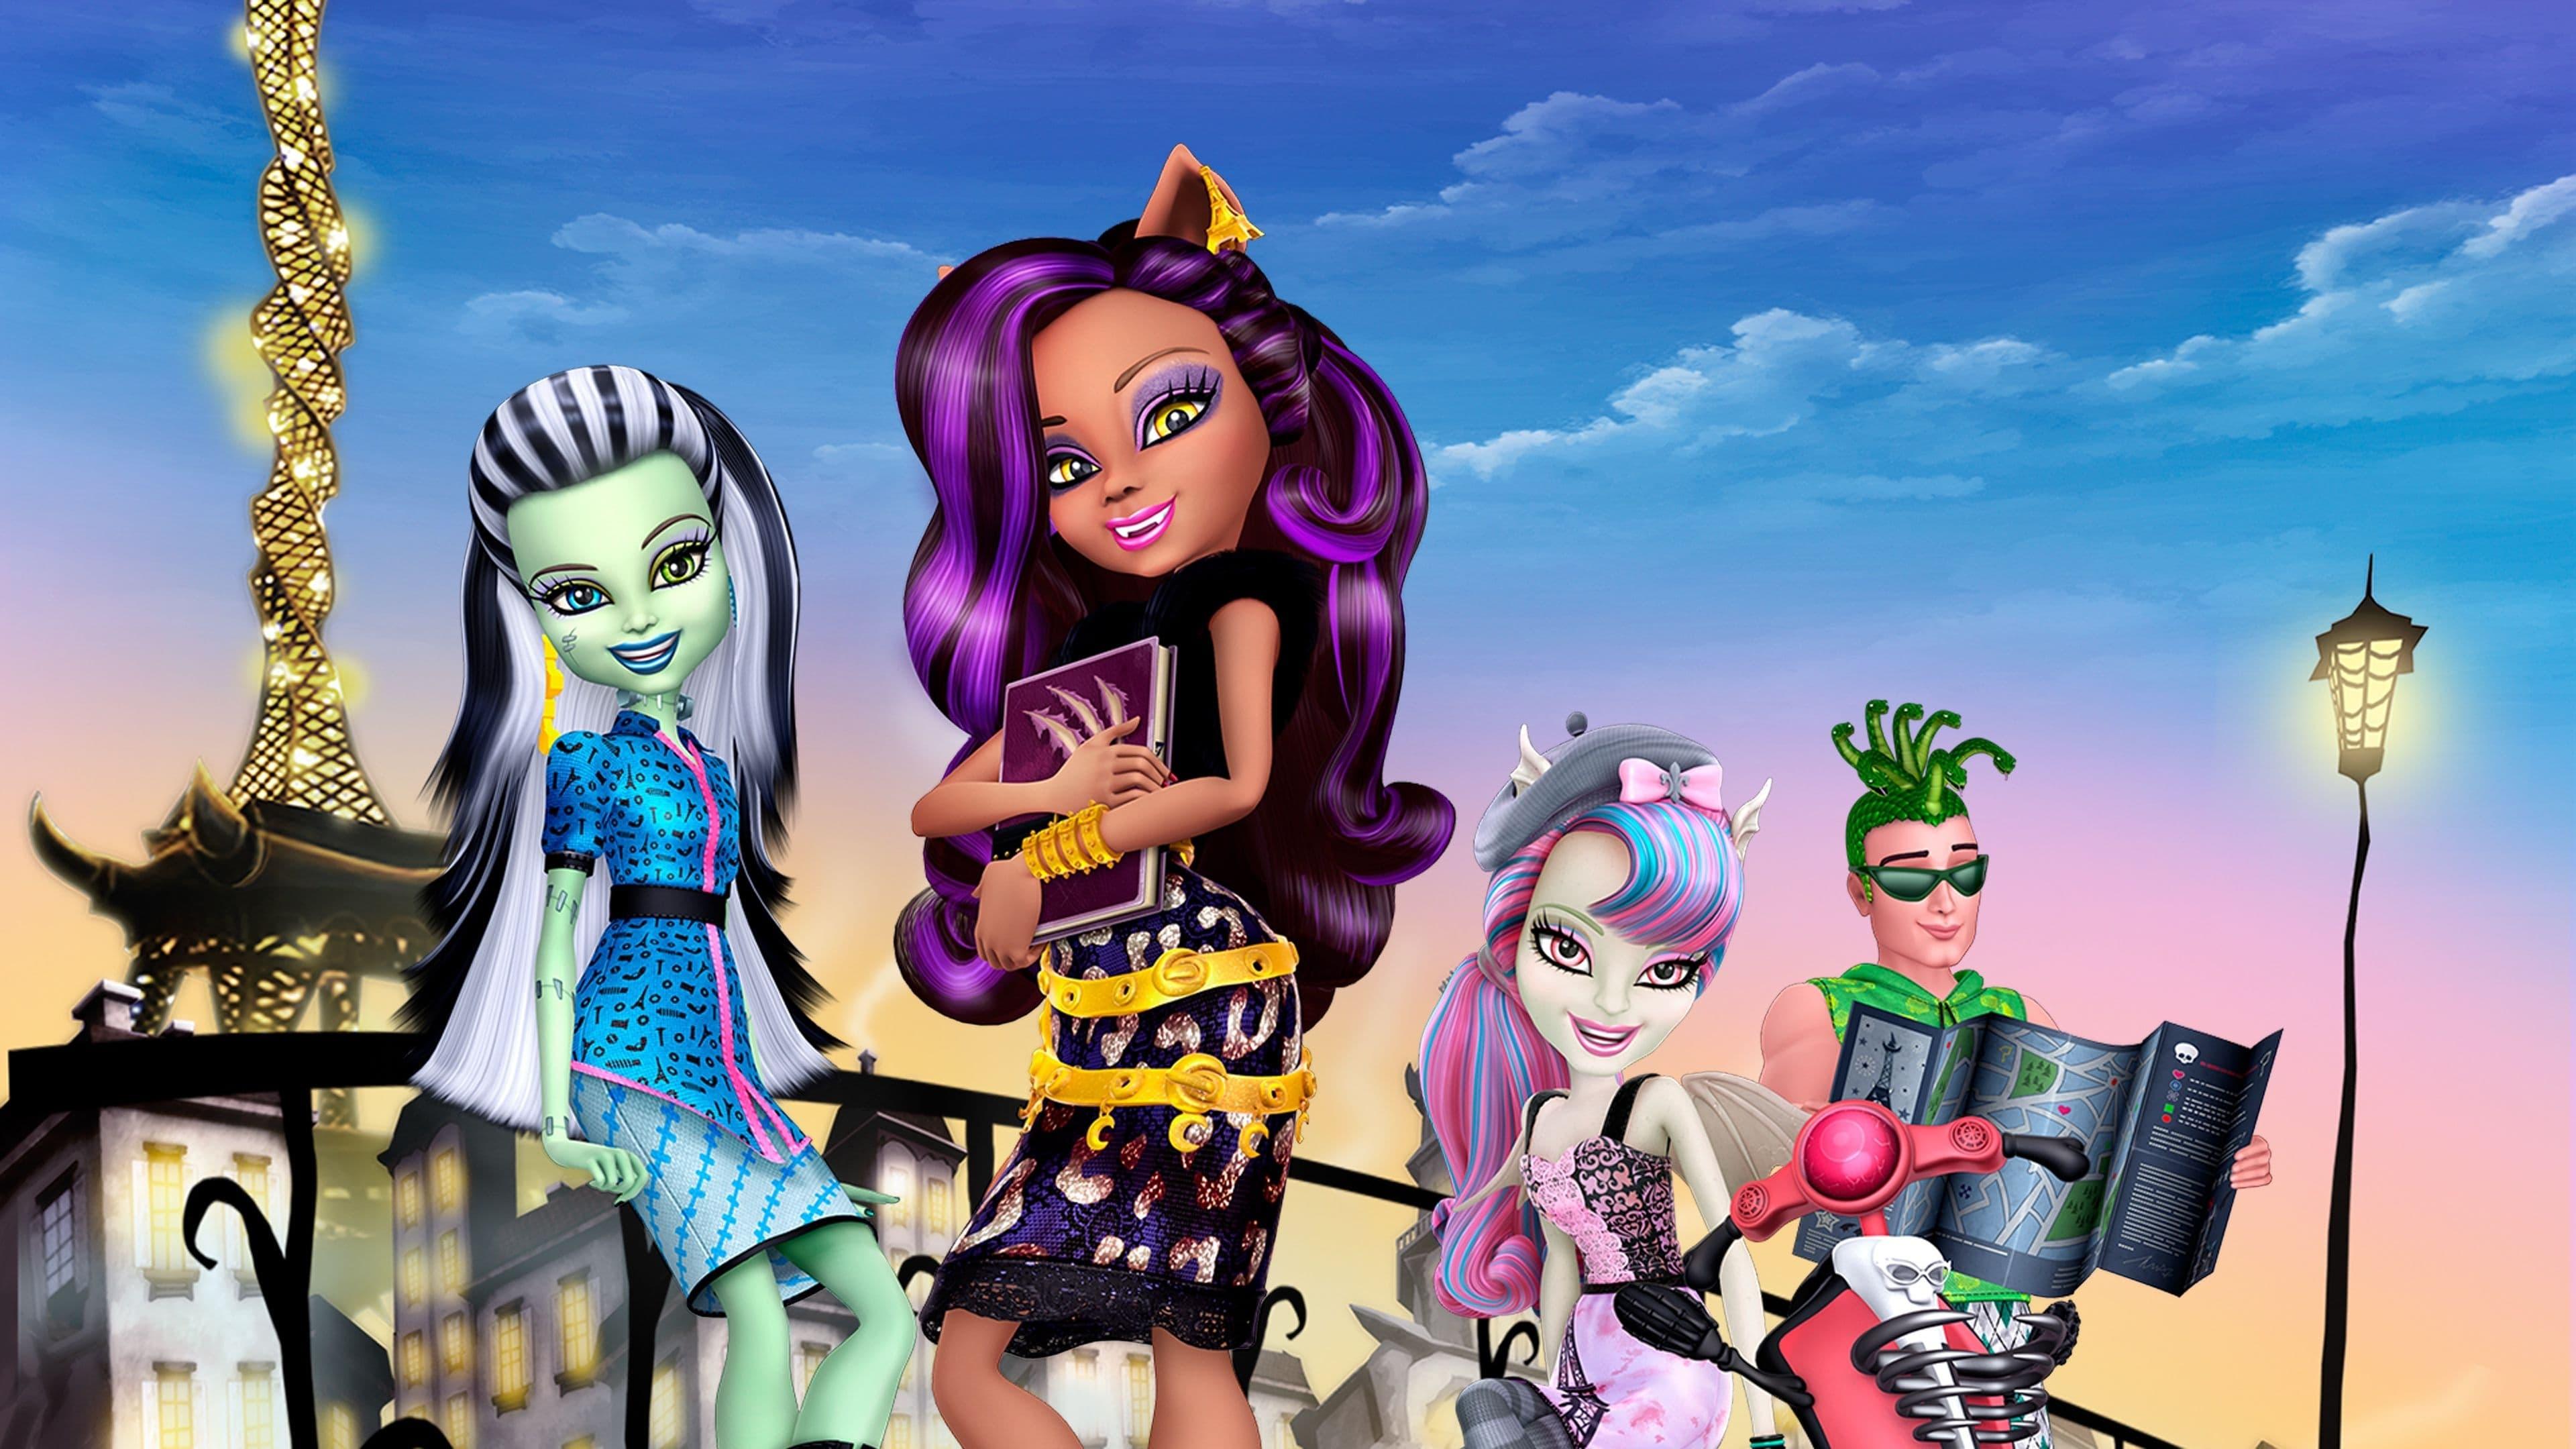 Monster High: Scaris City of Frights backdrop